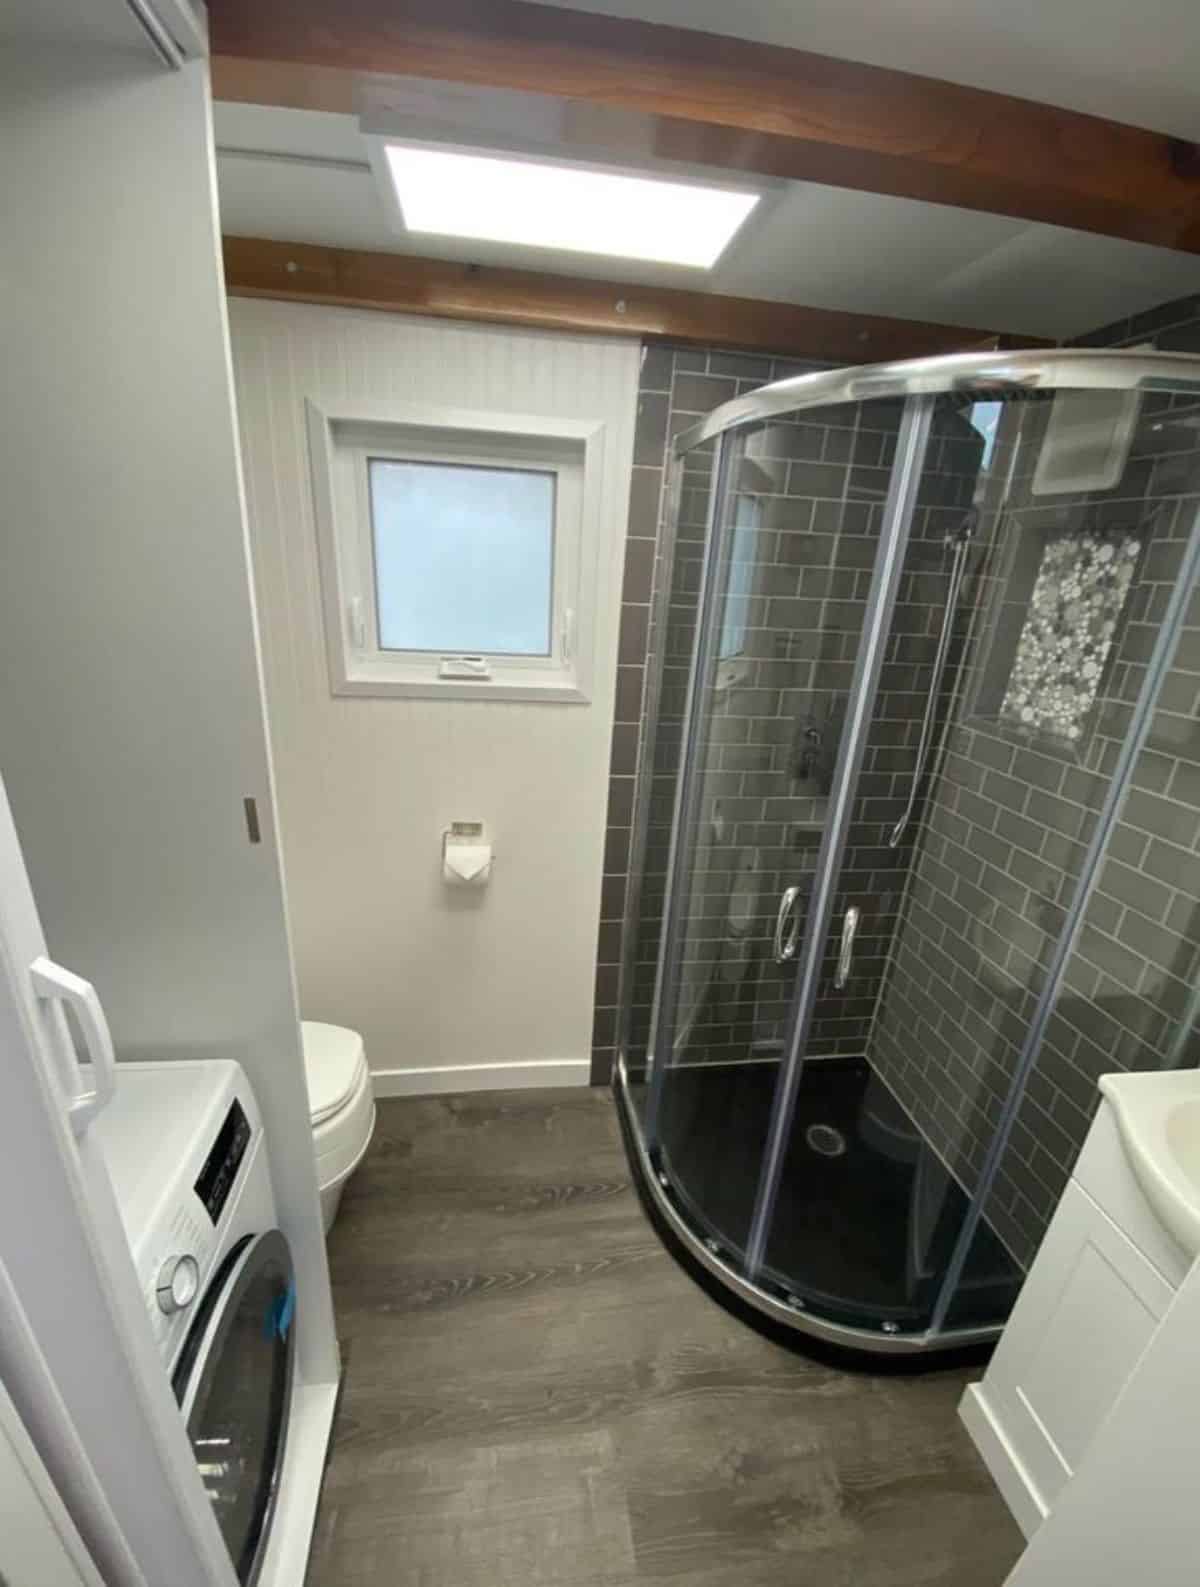 bathroom of 24' towable tiny home is spacious with standard fittings, separate shower with glass enclosure and washer dryer combo